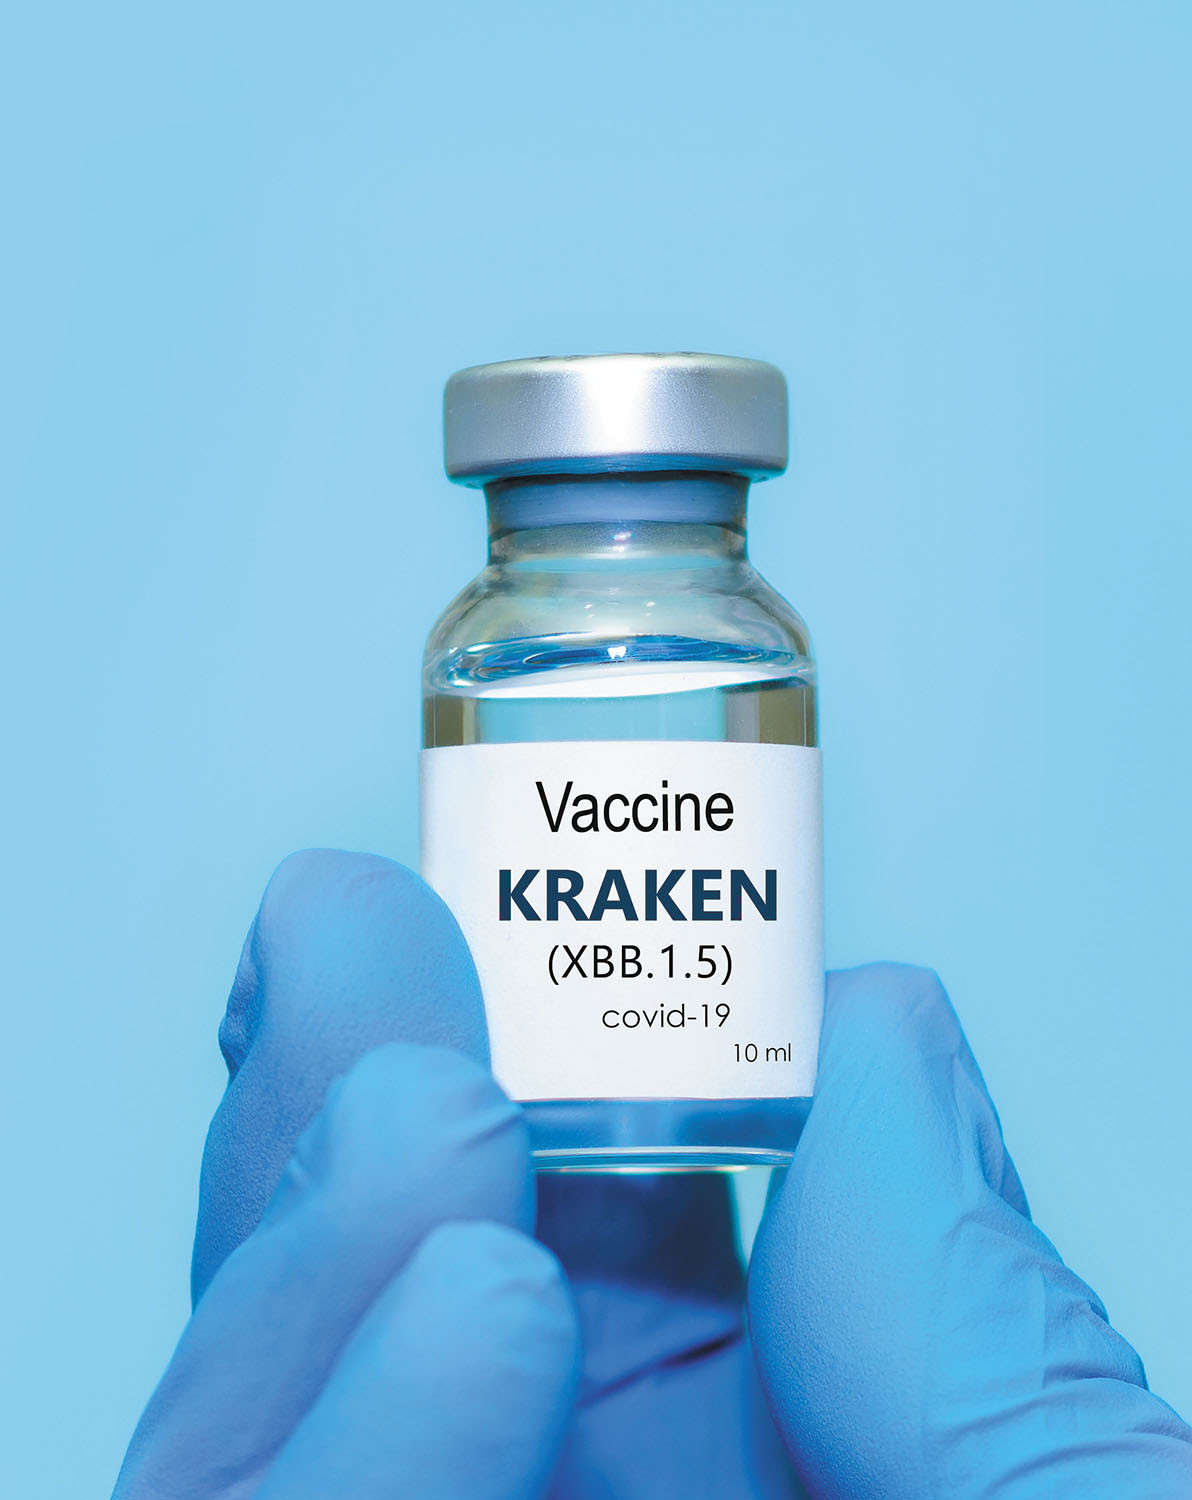 photo of a gloved hand holding a bottle containing vaccine for the COVID subvariant called Kraken